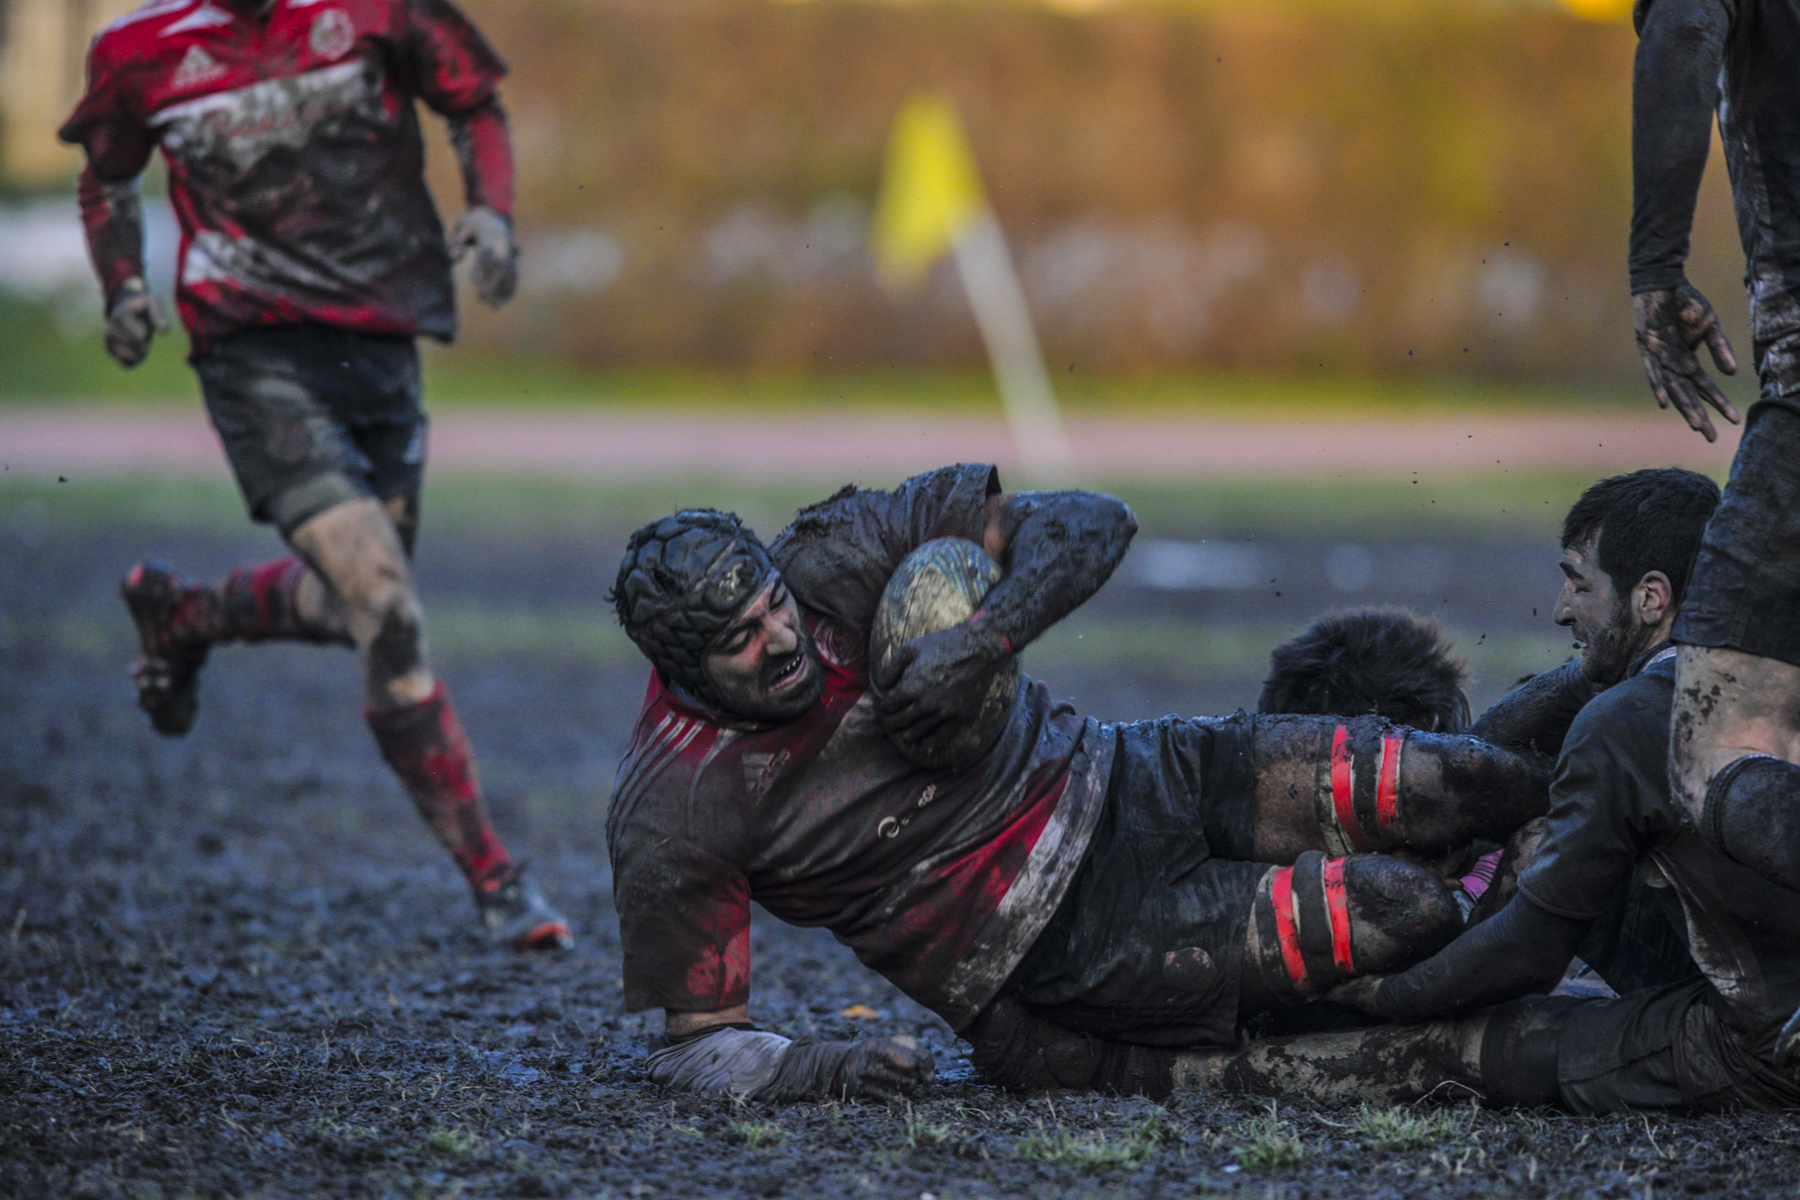 rugby being played in muddy conditions